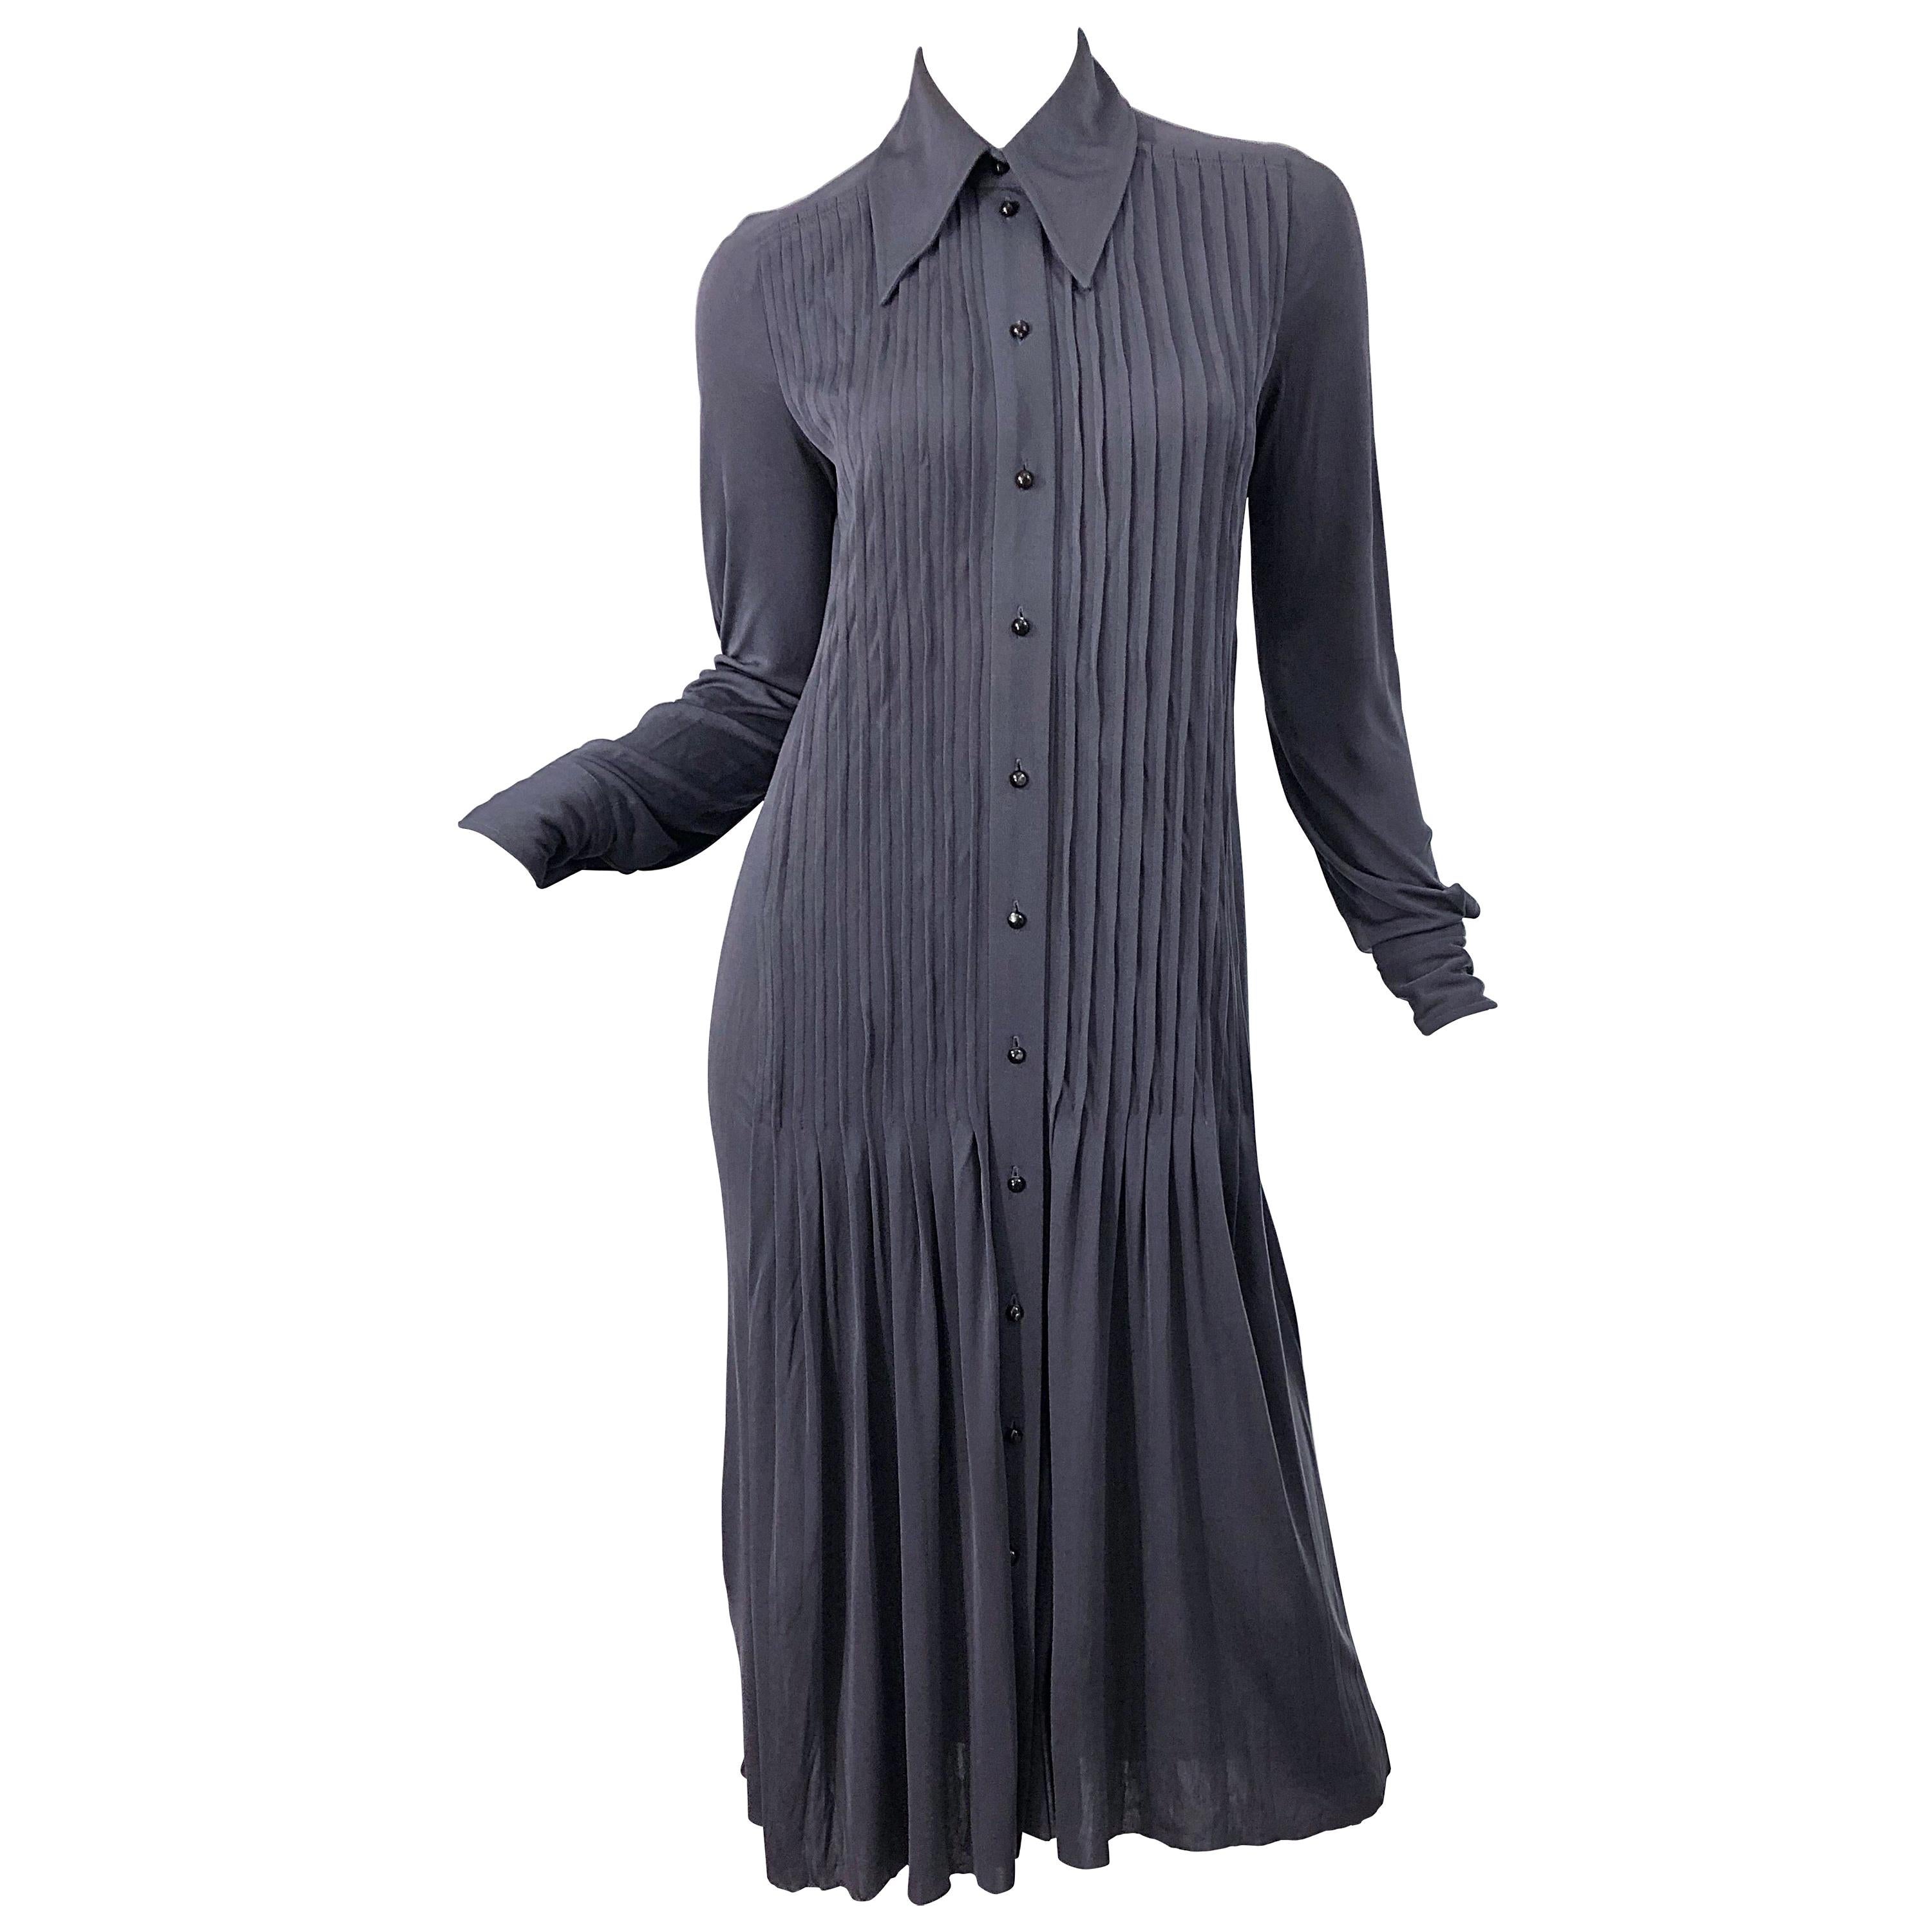 Marc Jacobs for Bergdorf Goodman 1920s Flapper Style Gray 20s Rayon Shirt Dress